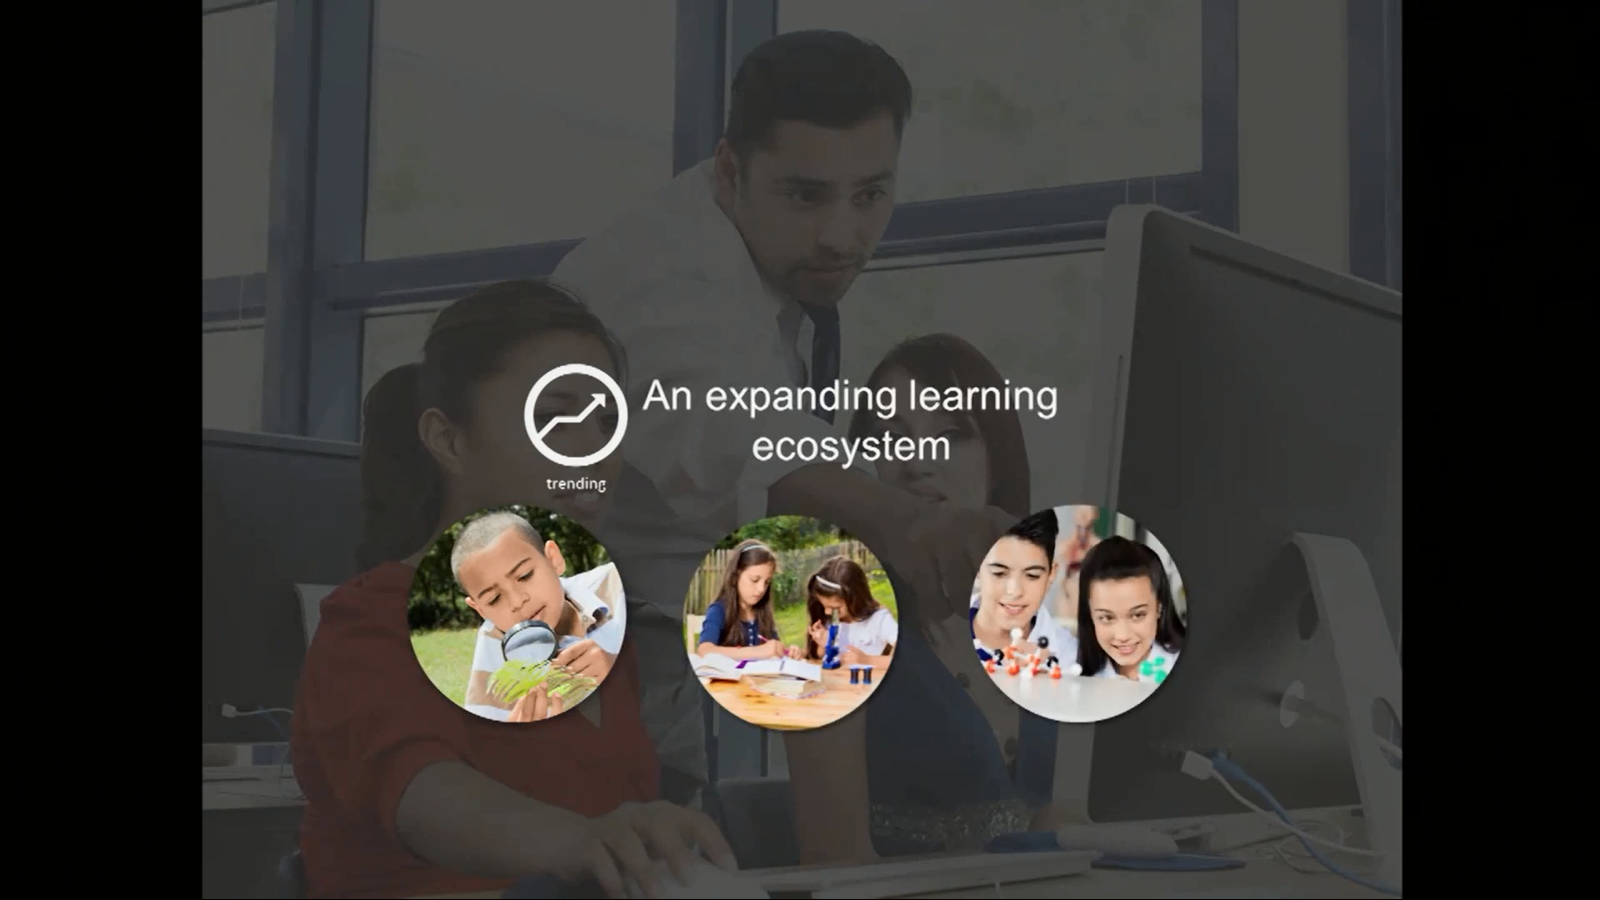 Learning Ecosystems mentioned again2